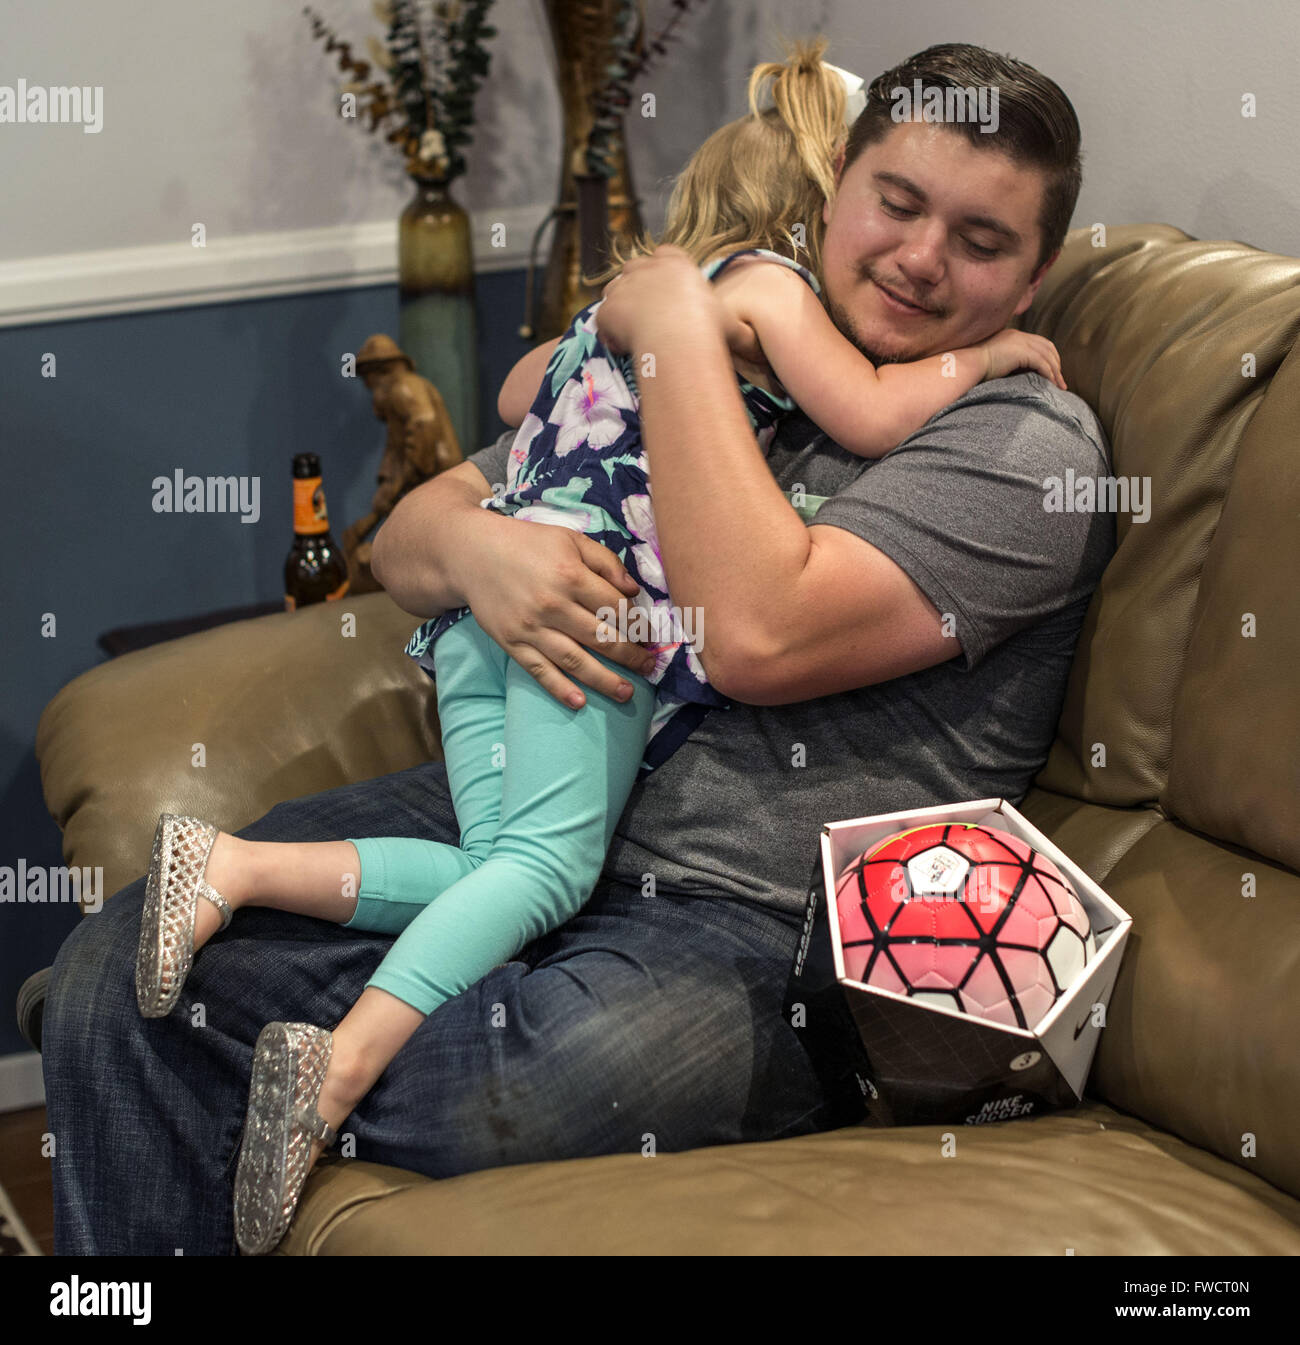 La Habra, California, USA. 3rd Apr, 2016. During her family birthday party, DELANEY CHAMBERS, 4, of La Habra, California, hugs her uncle COLIN CHAMBERS, of Placentia, California, for the gift of a soccer ball. © Bruce Chambers/ZUMA Wire/Alamy Live News Stock Photo